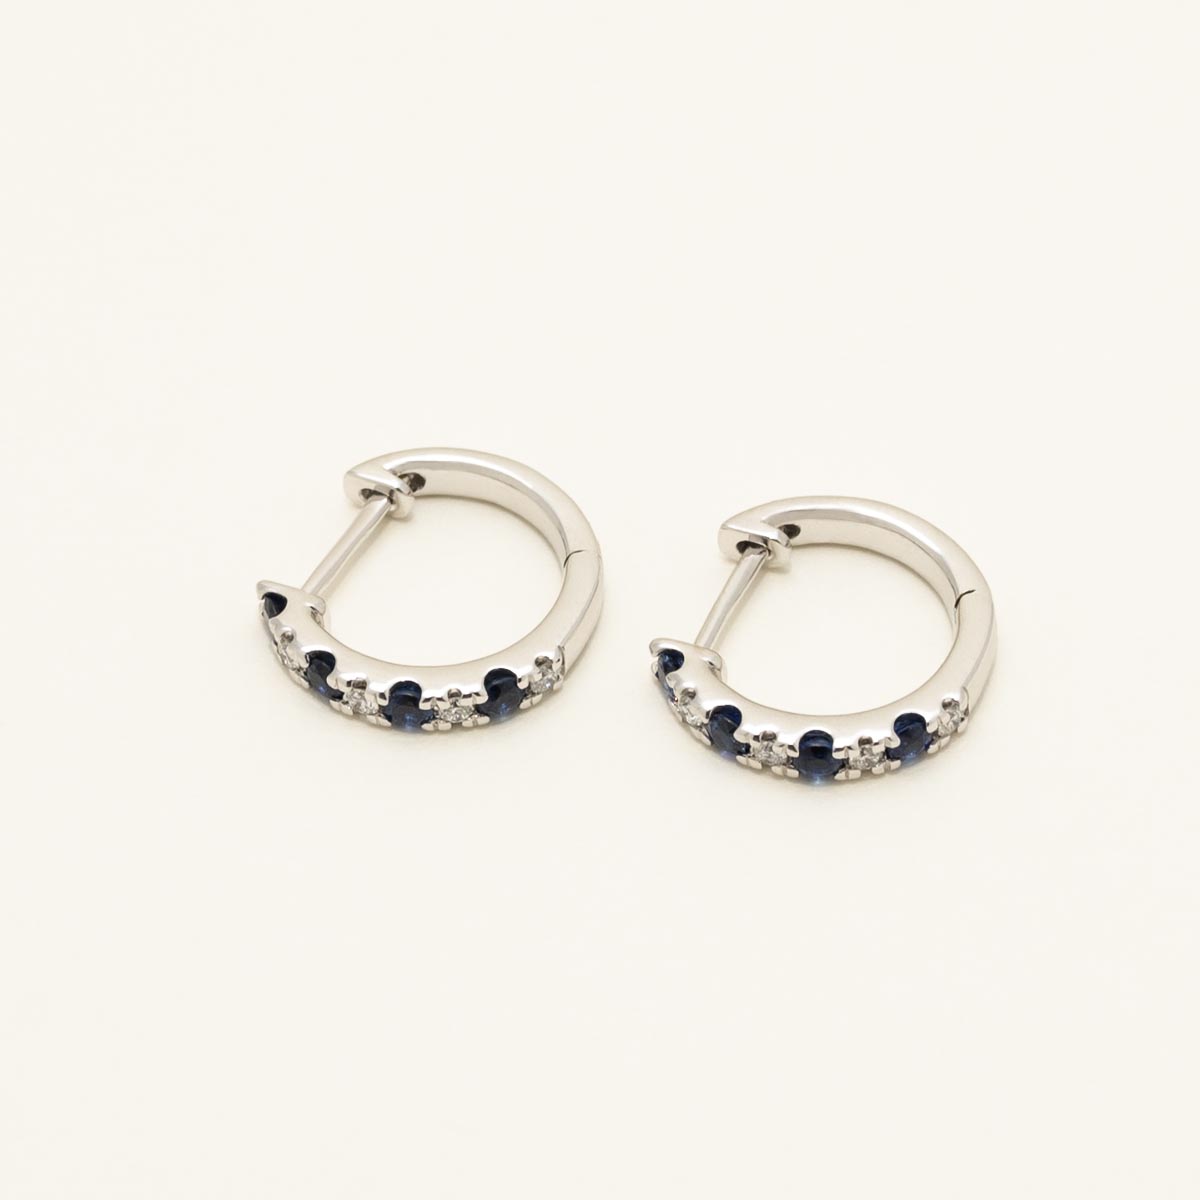 Sapphire Hoop Earrings in 14kt White Gold with Diamonds (1/10ct tw)